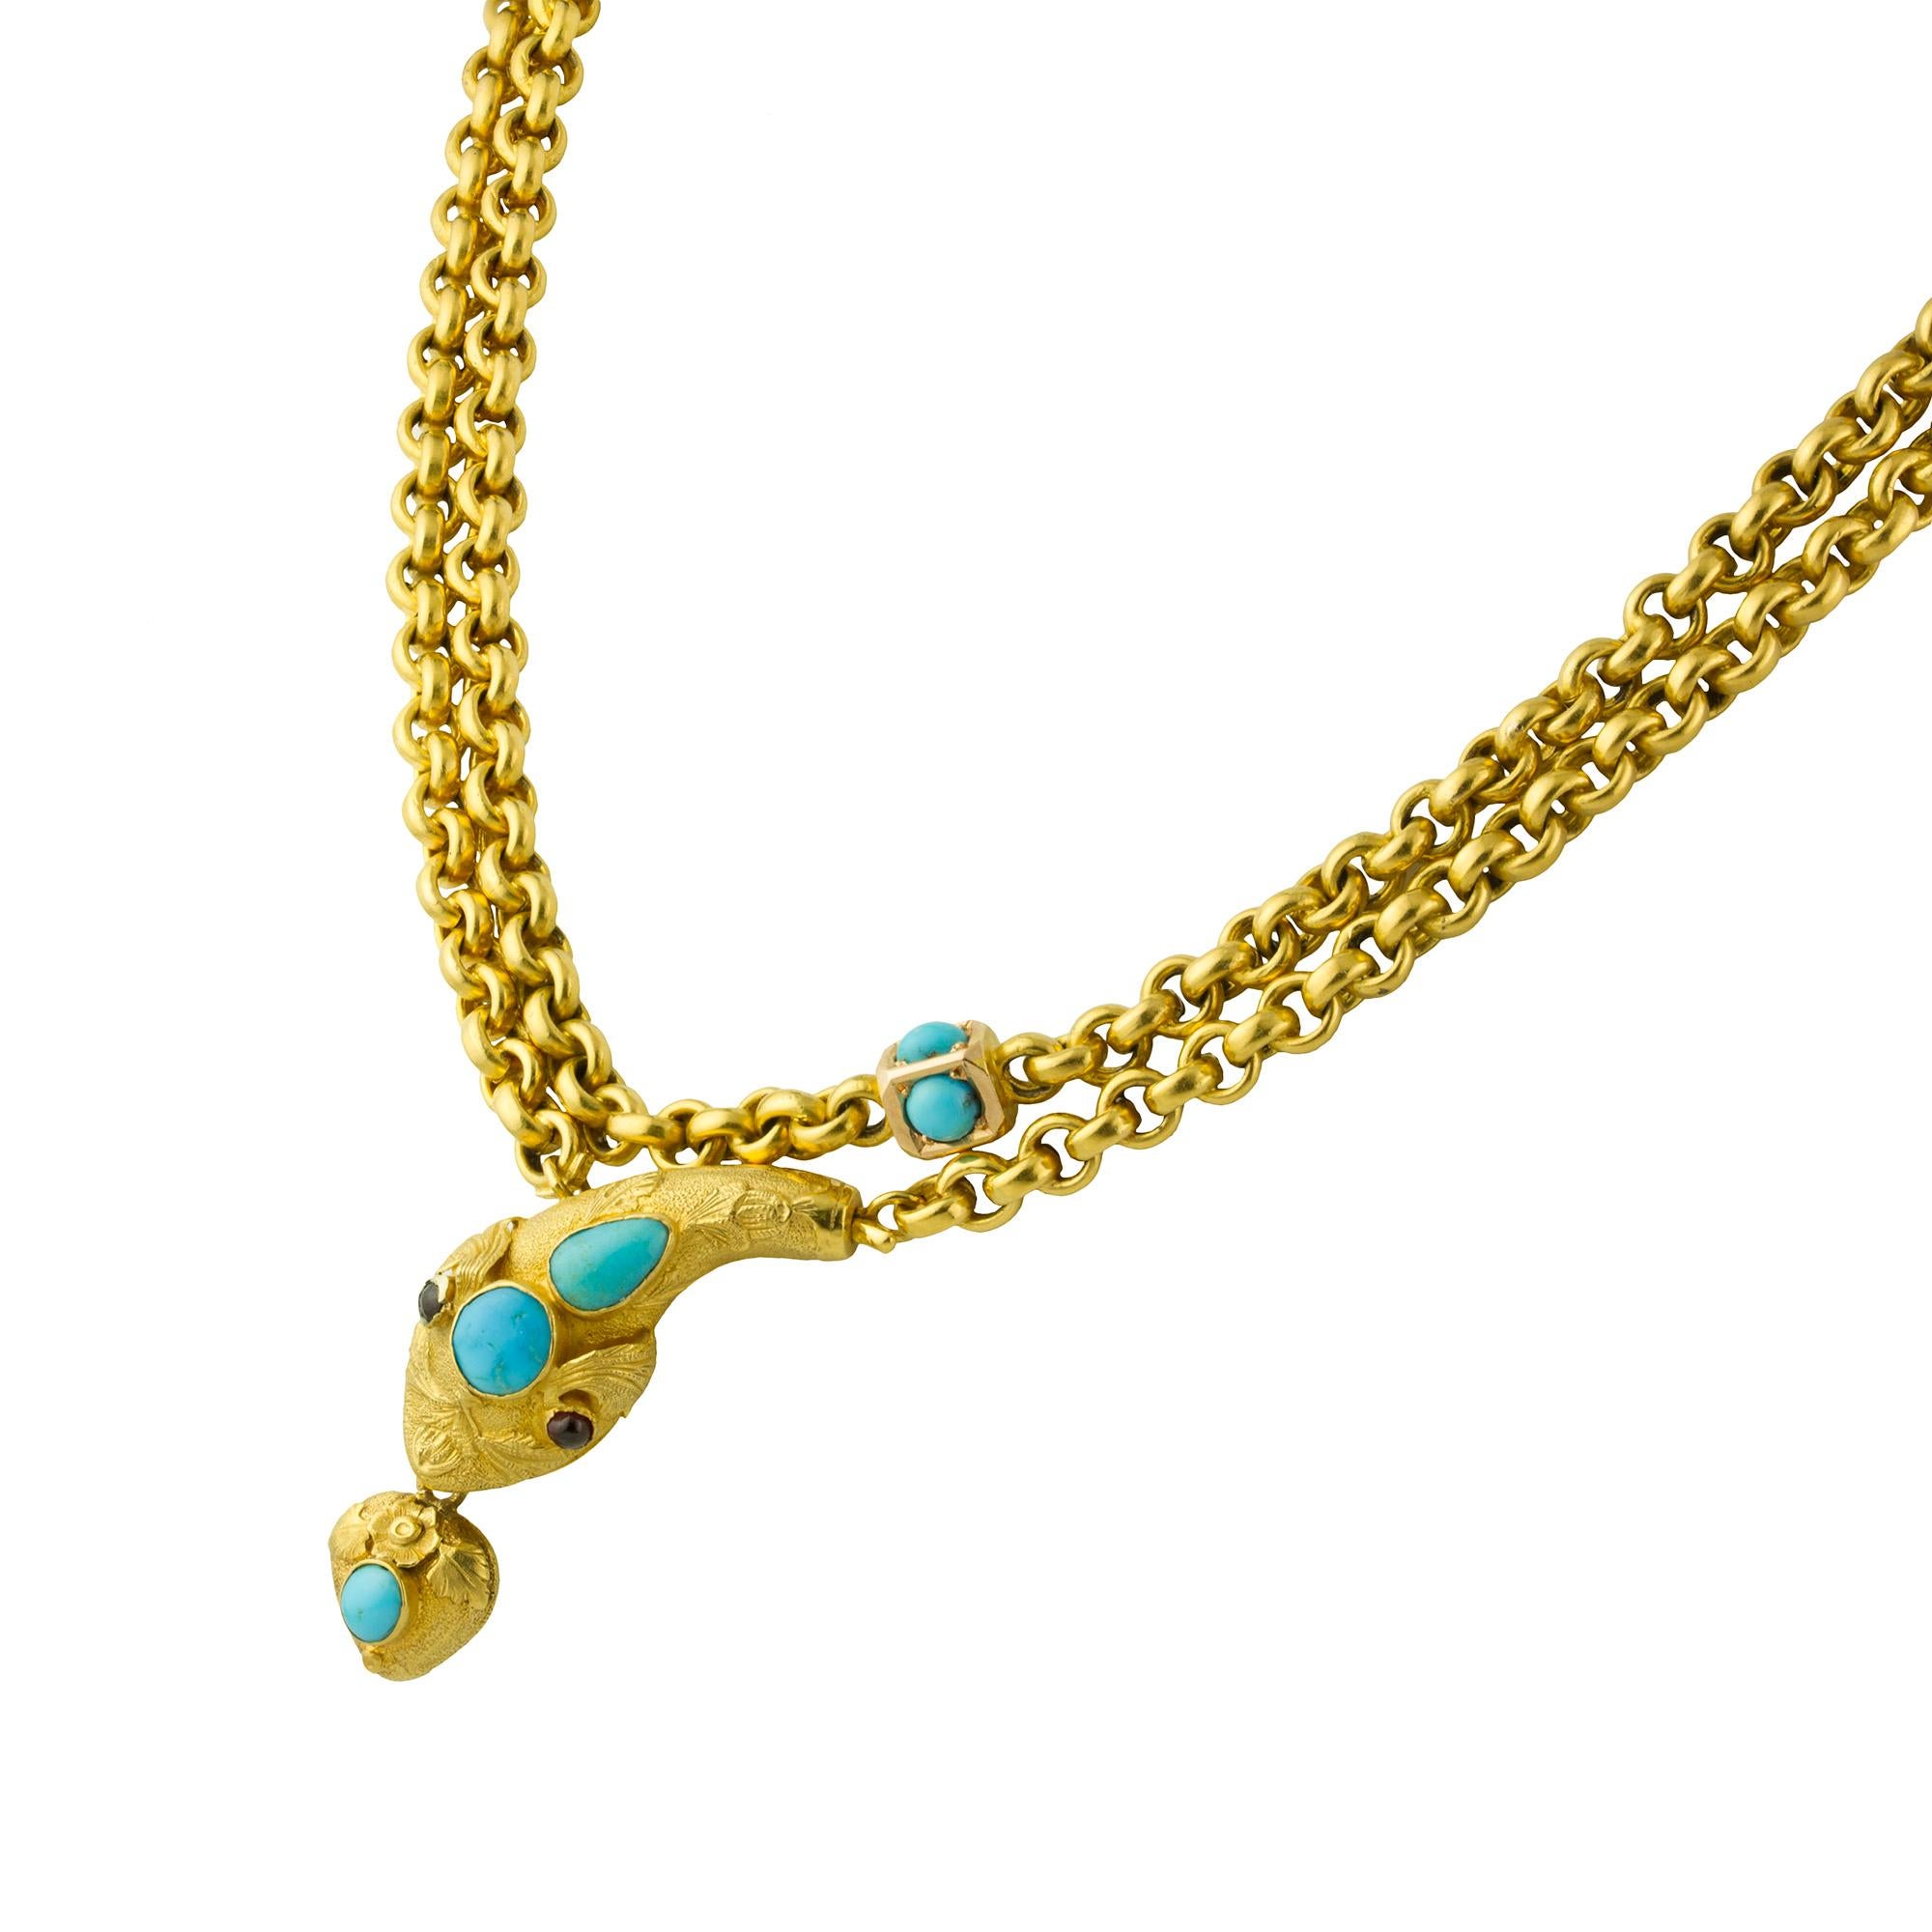 A Victorian turquoise and gold serpent chain necklace, a yellow gold muff chain set with nine turquoise beads within a yellow gold square, leading to an ornate serpent head set with turquoise and garnet eyes, the mouth suspending a heart shape